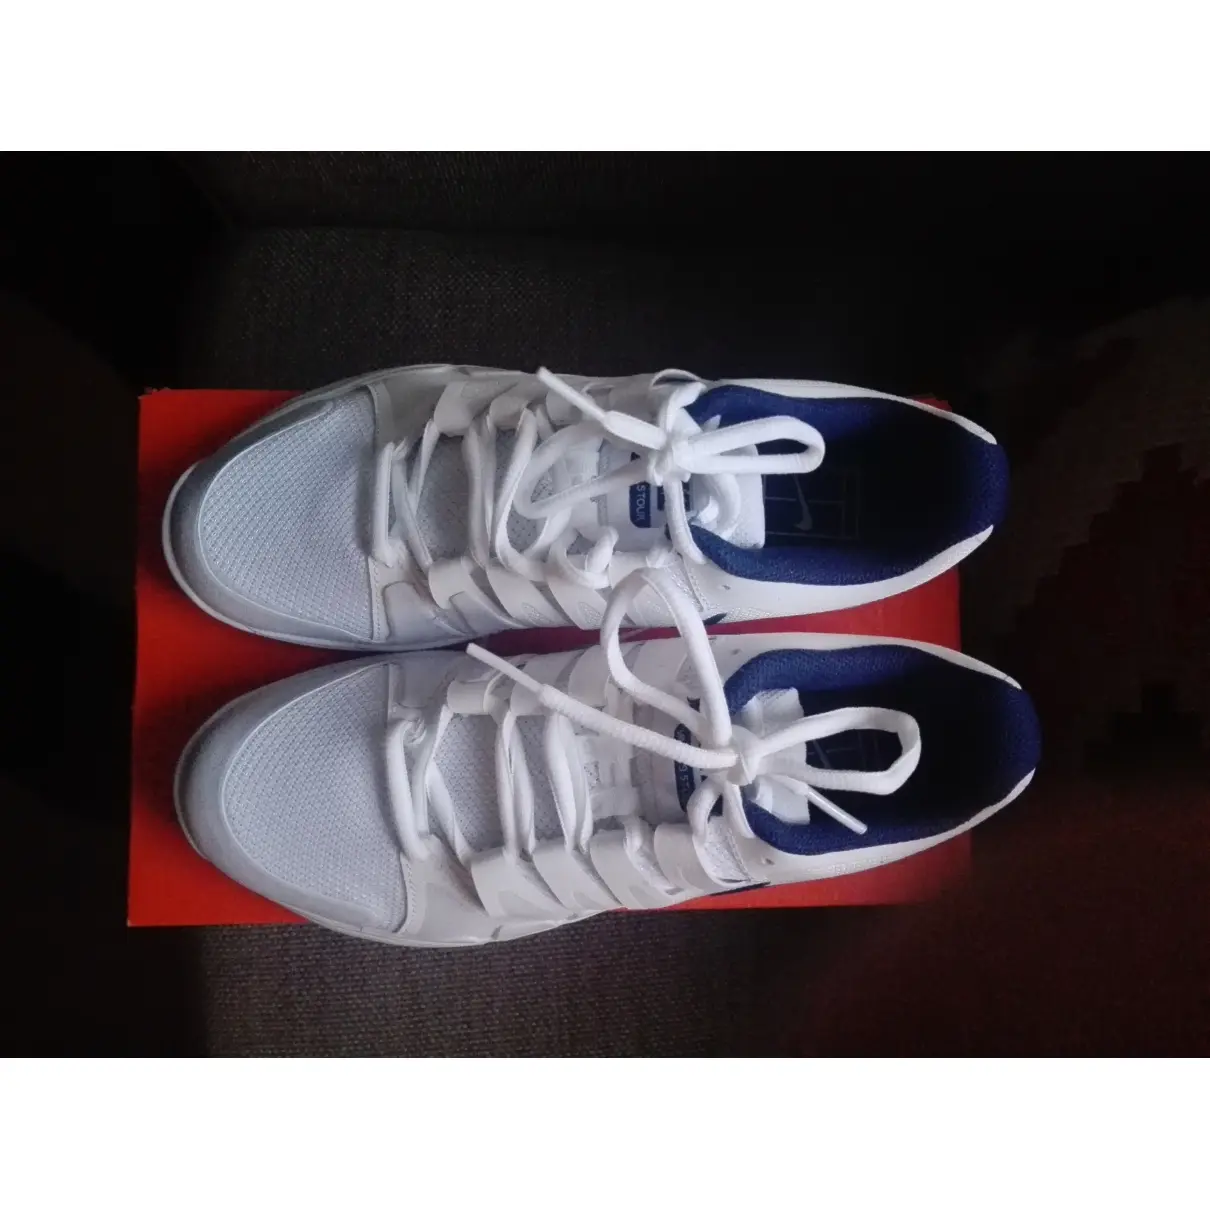 Nike Cloth trainers for sale